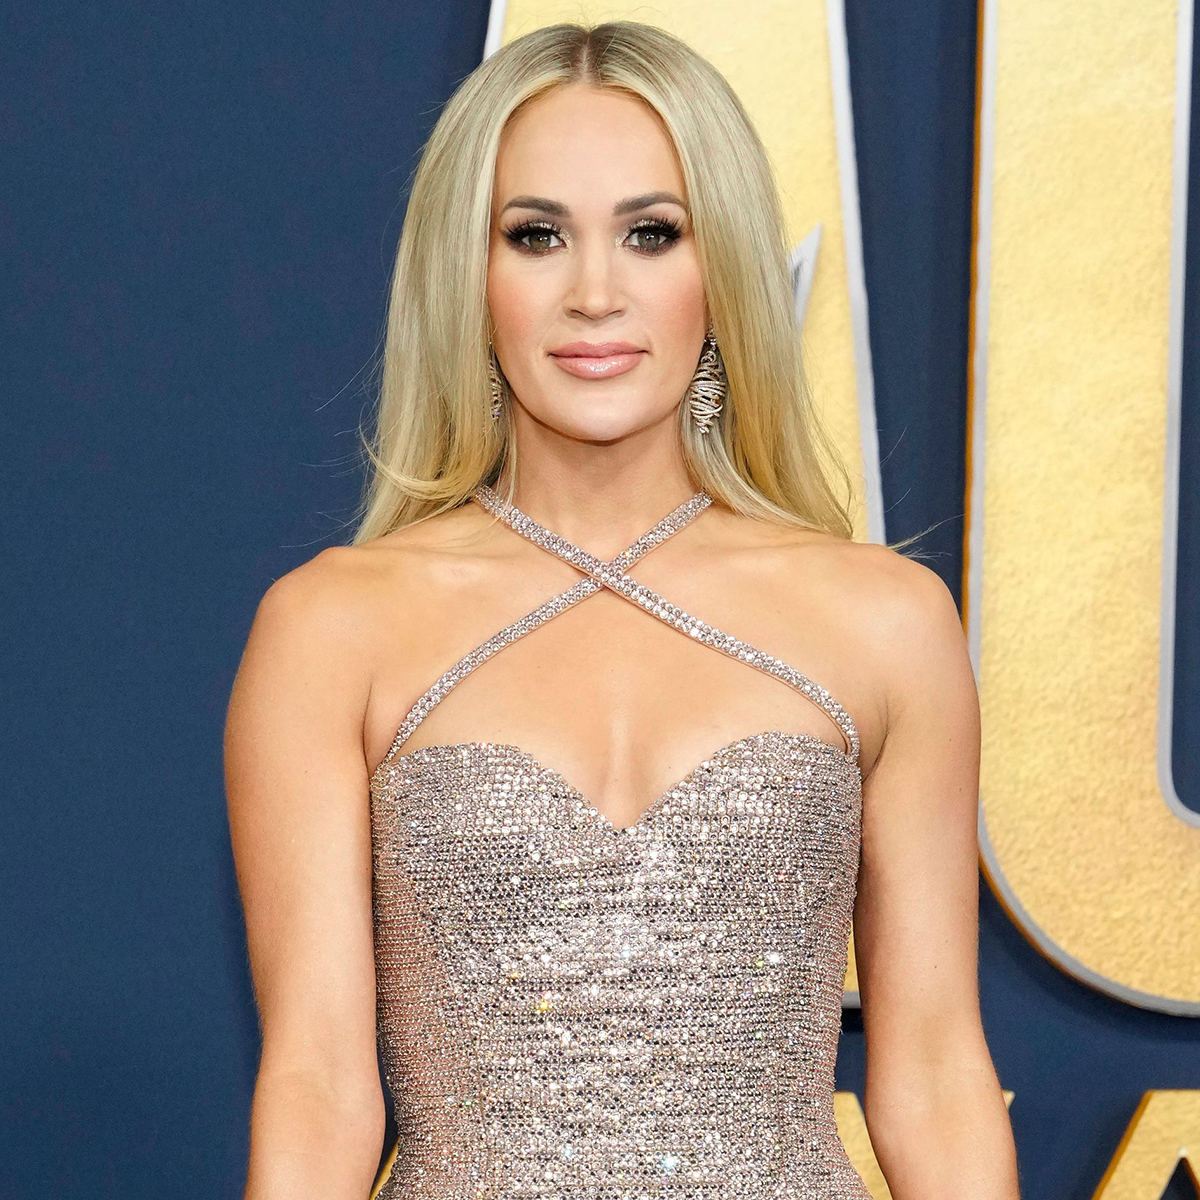 Carrie Underwood Shares Makeup-Free Video After CMA Nominations